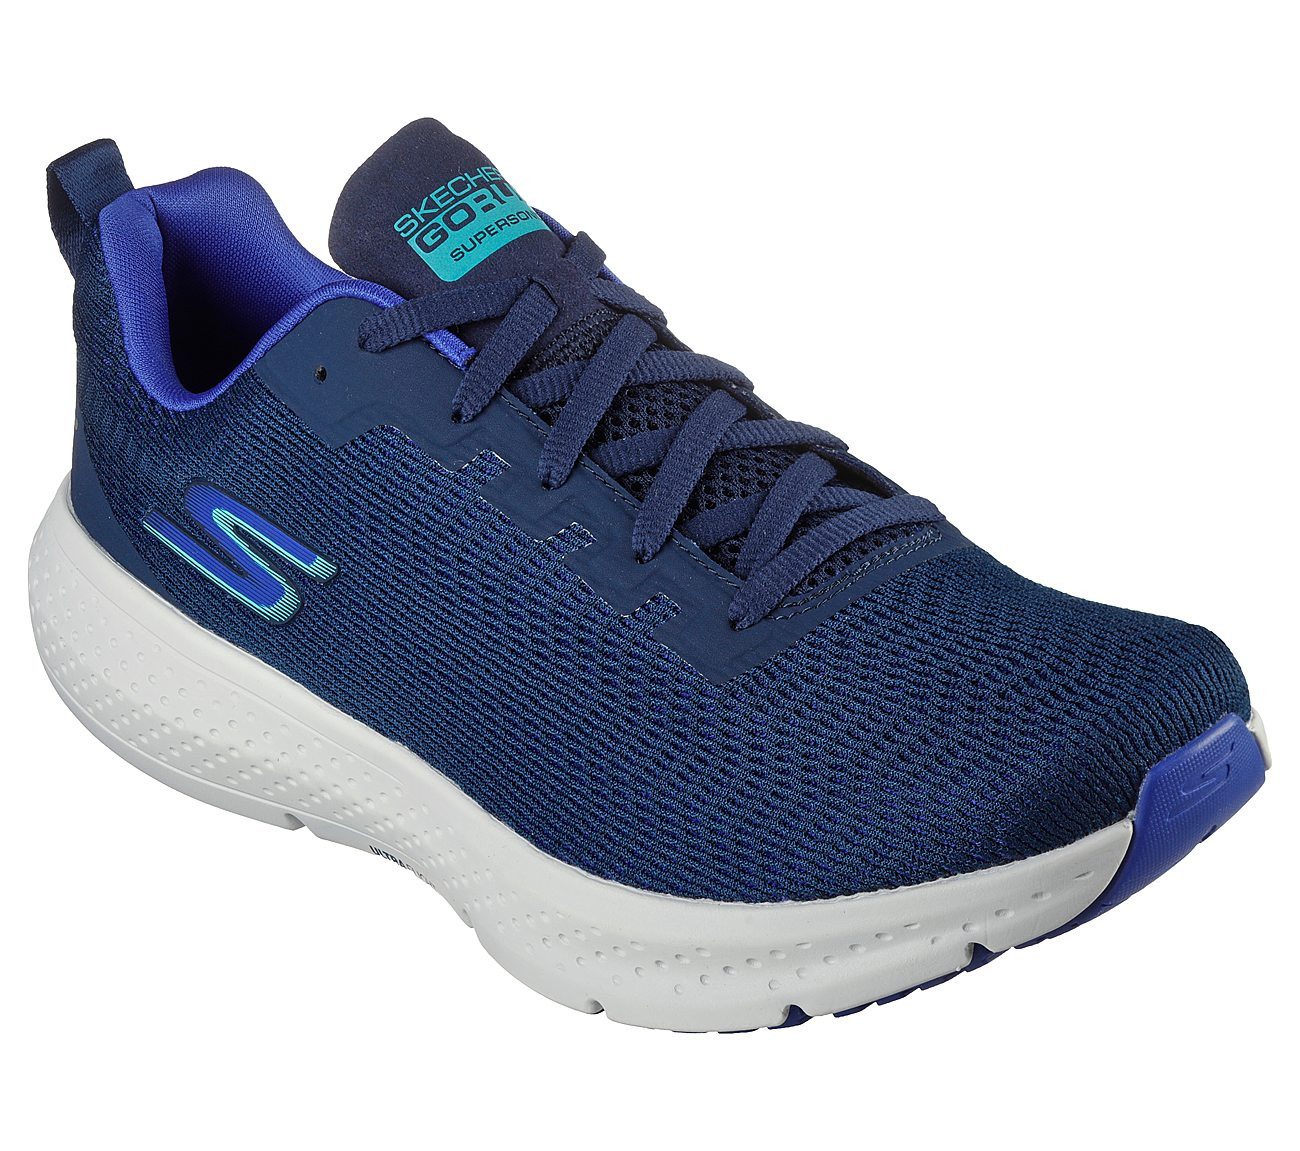 Skechers Mens GOrun Supersonic - Relaxed Fit Nvy NAVY